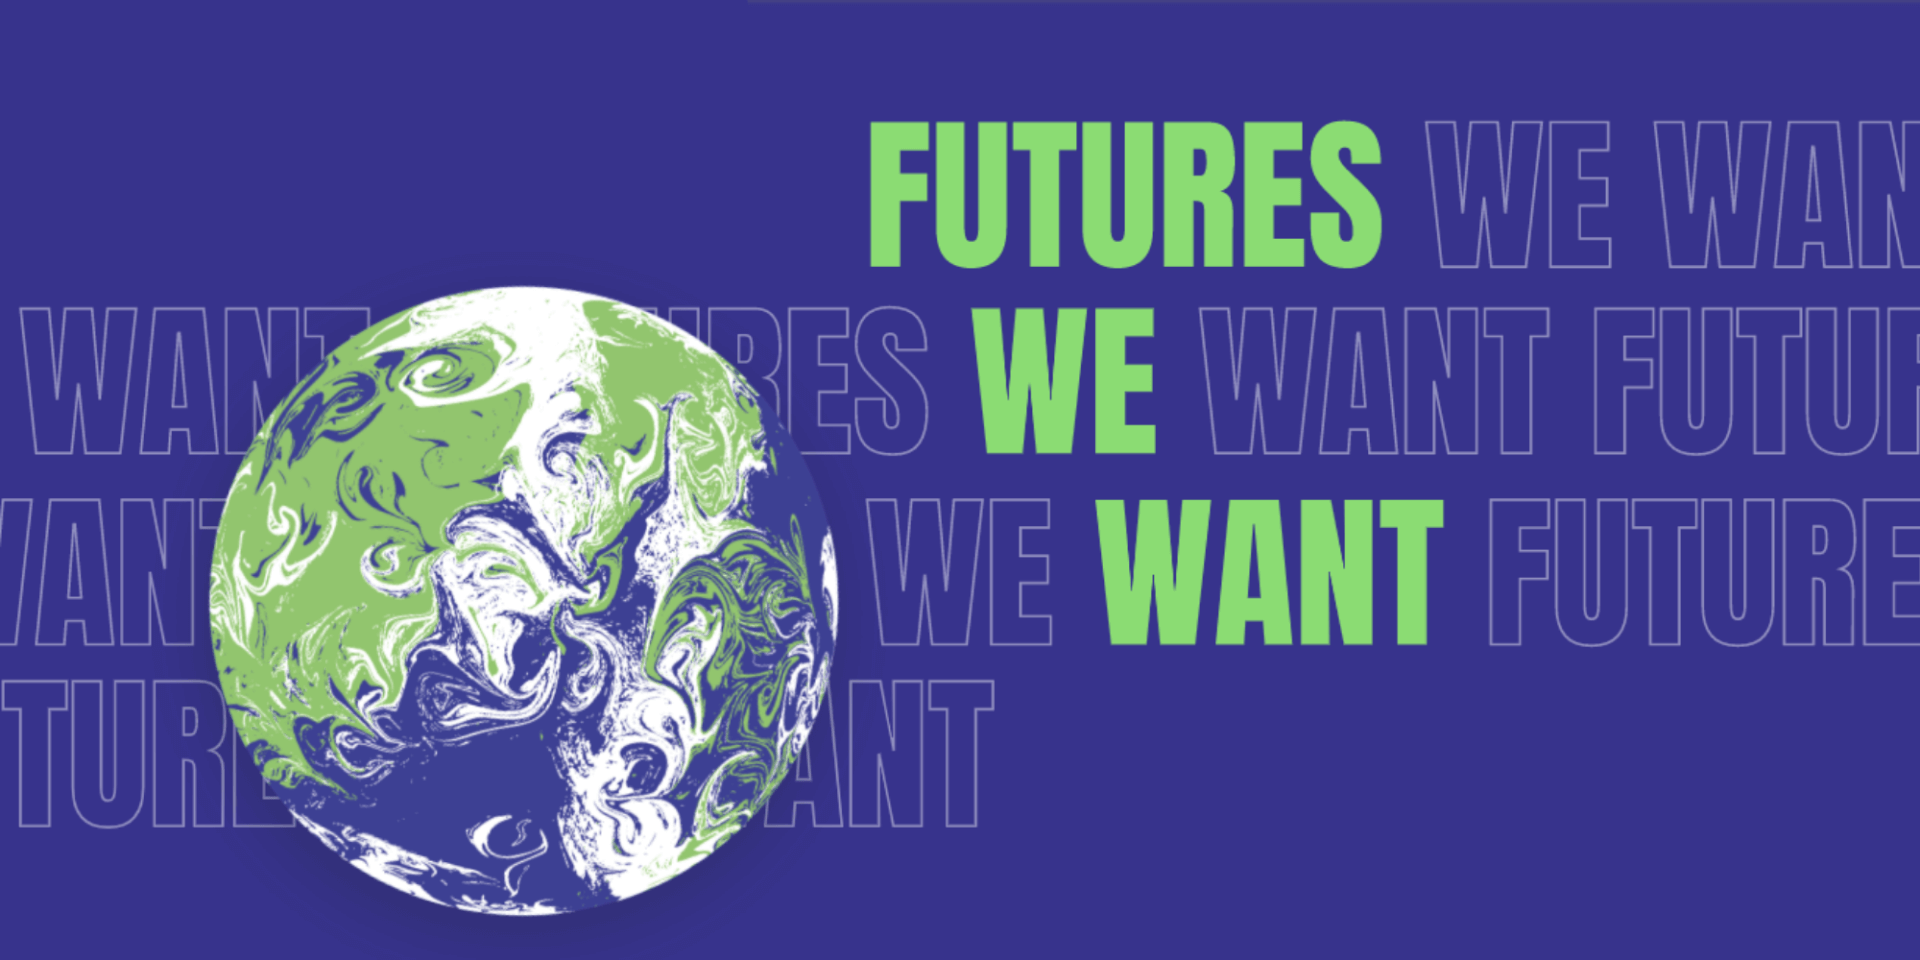 Futures we want image